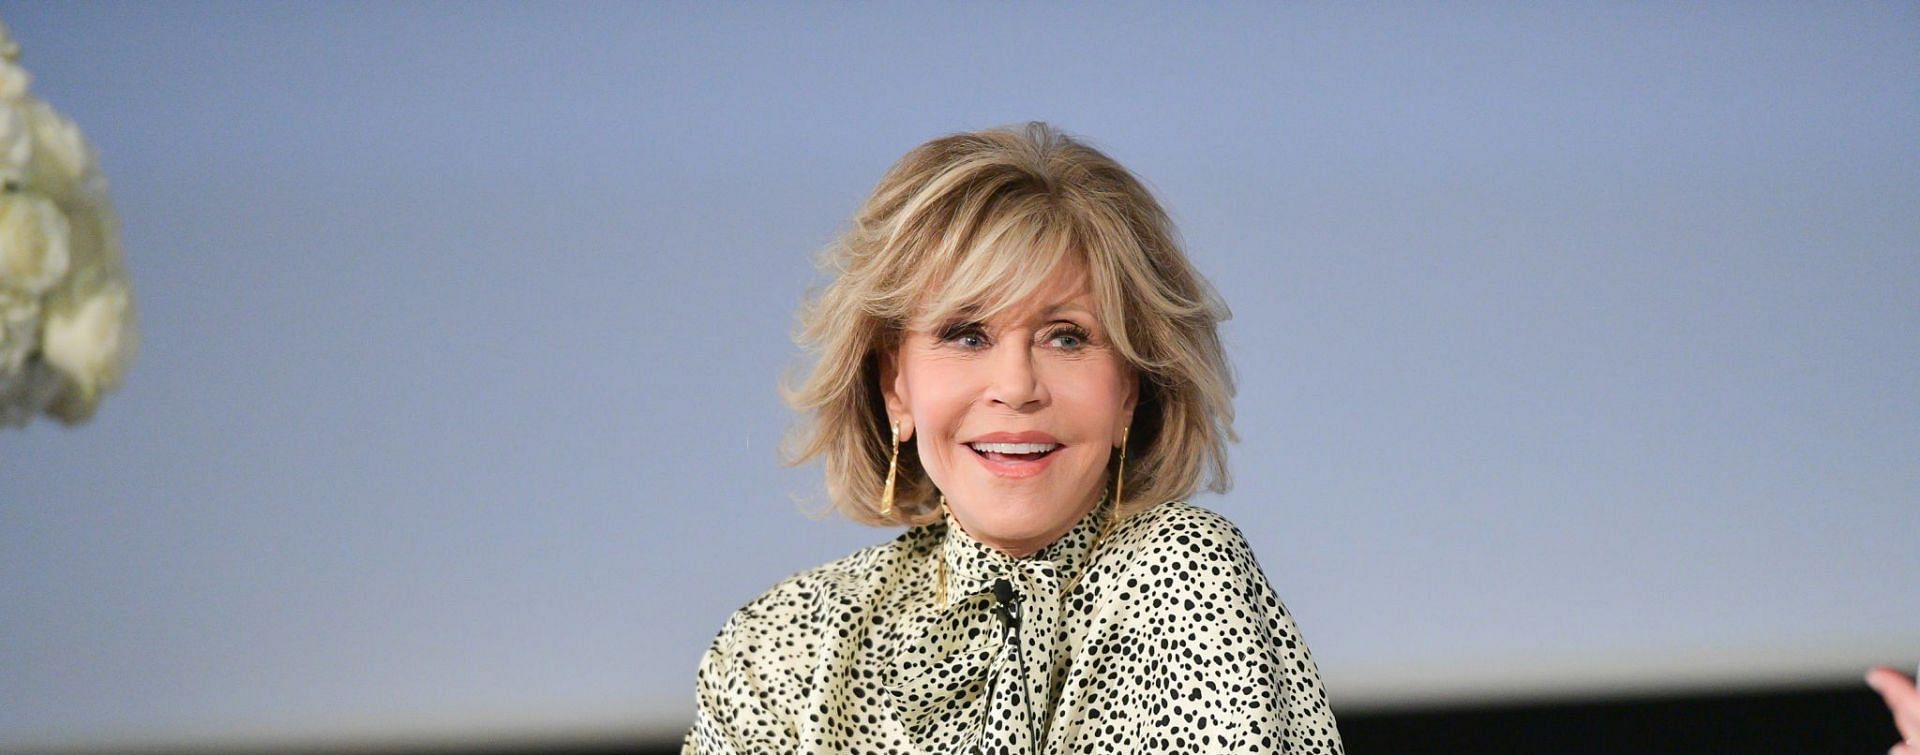 Netizens called out Jane Fonda over controversial &quot;murder&quot; remark (Image via Getty Images)